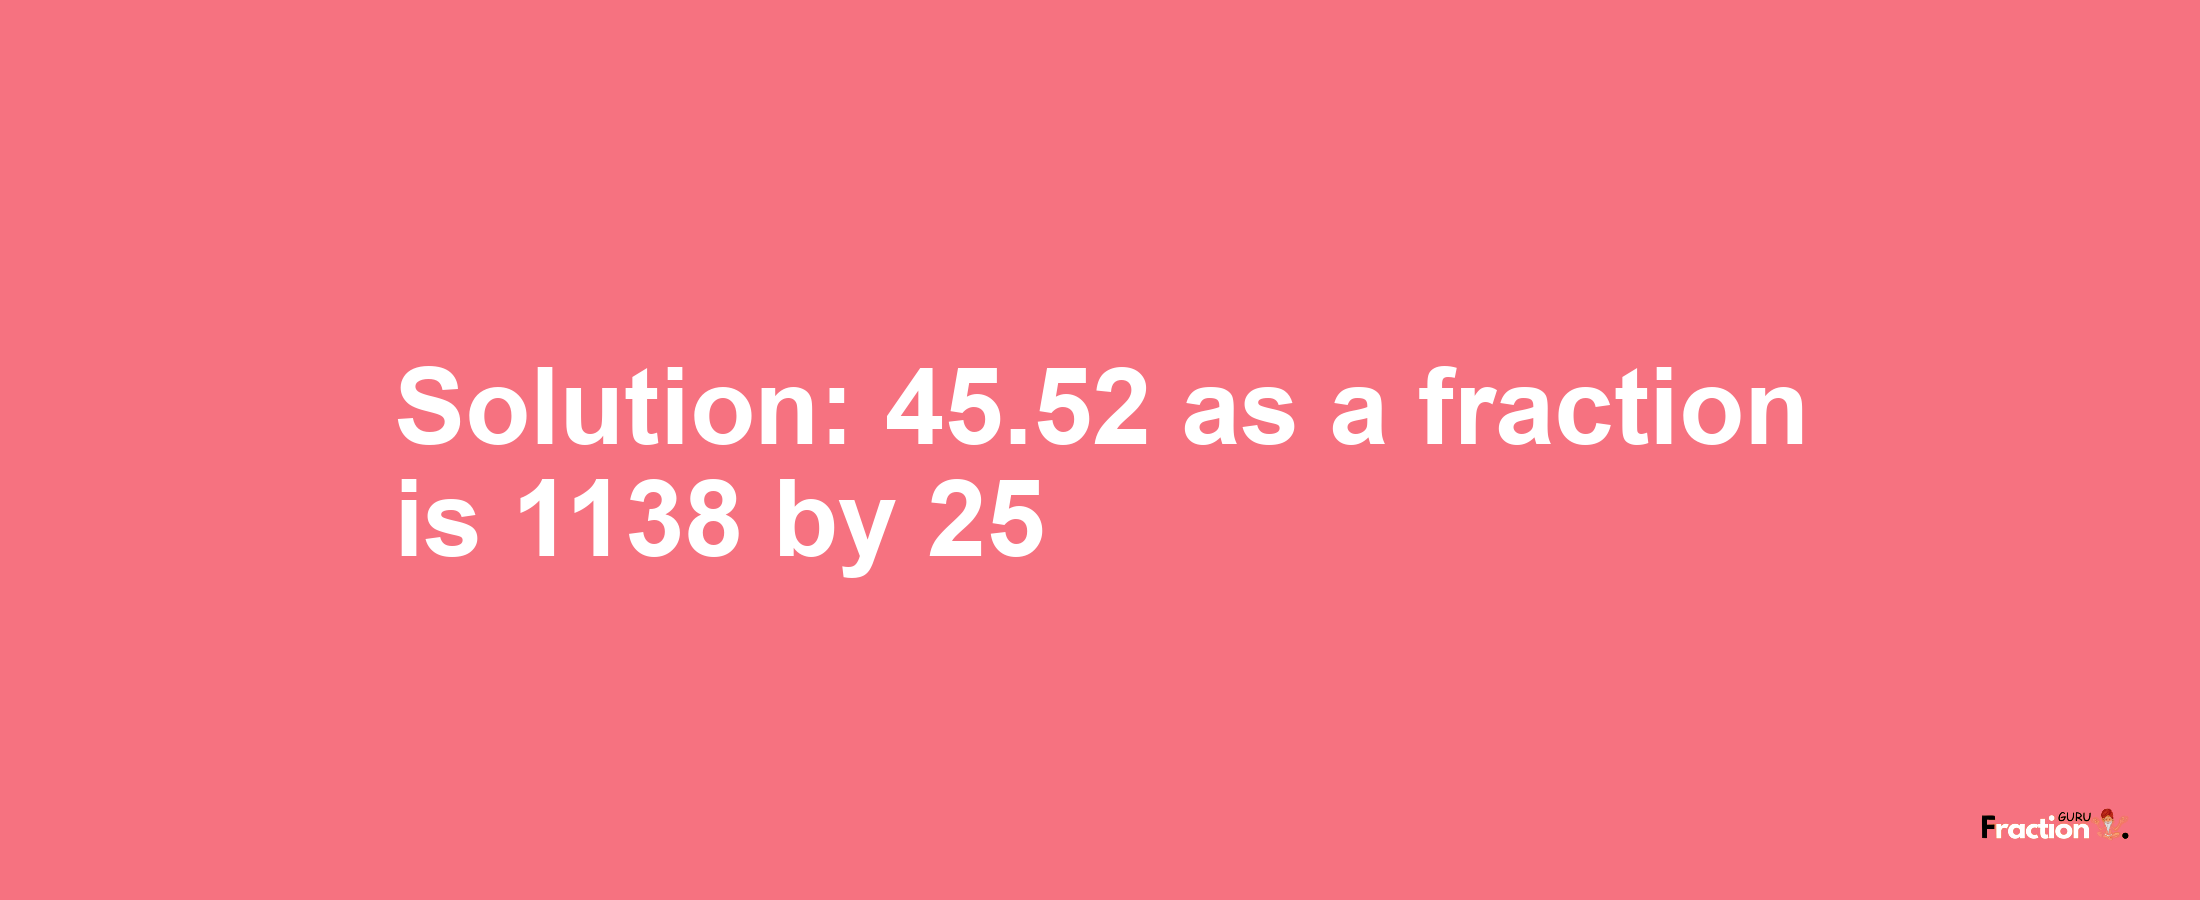 Solution:45.52 as a fraction is 1138/25